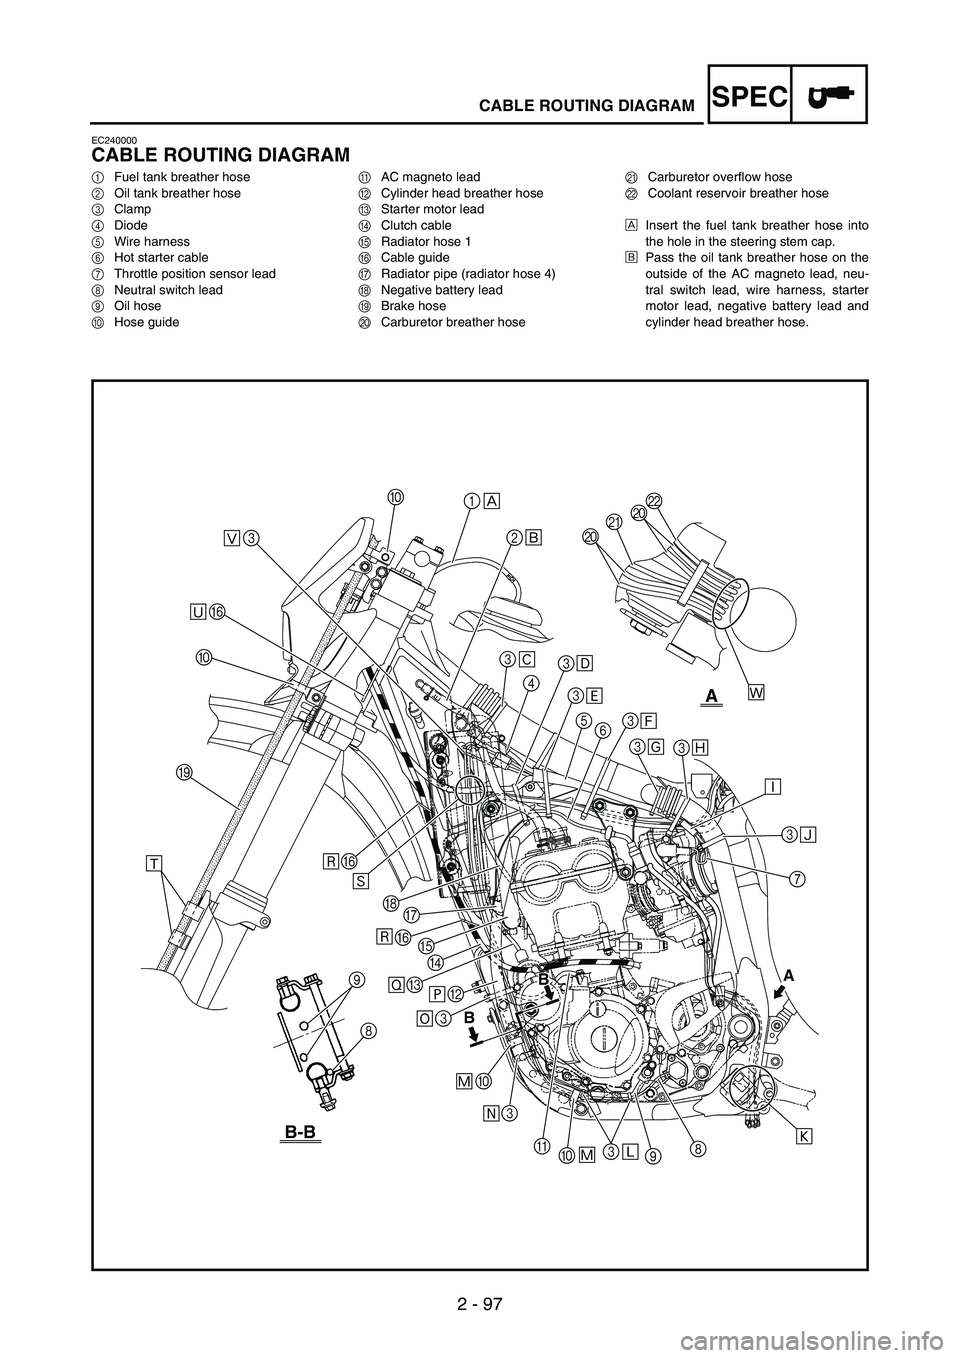 YAMAHA WR 250F 2004  Manuale duso (in Italian) SPEC
2 - 97
CABLE ROUTING DIAGRAM
EC240000
CABLE ROUTING DIAGRAM
1Fuel tank breather hose
2Oil tank breather hose
3Clamp
4Diode
5Wire harness
6Hot starter cable
7Throttle position sensor lead
8Neutral